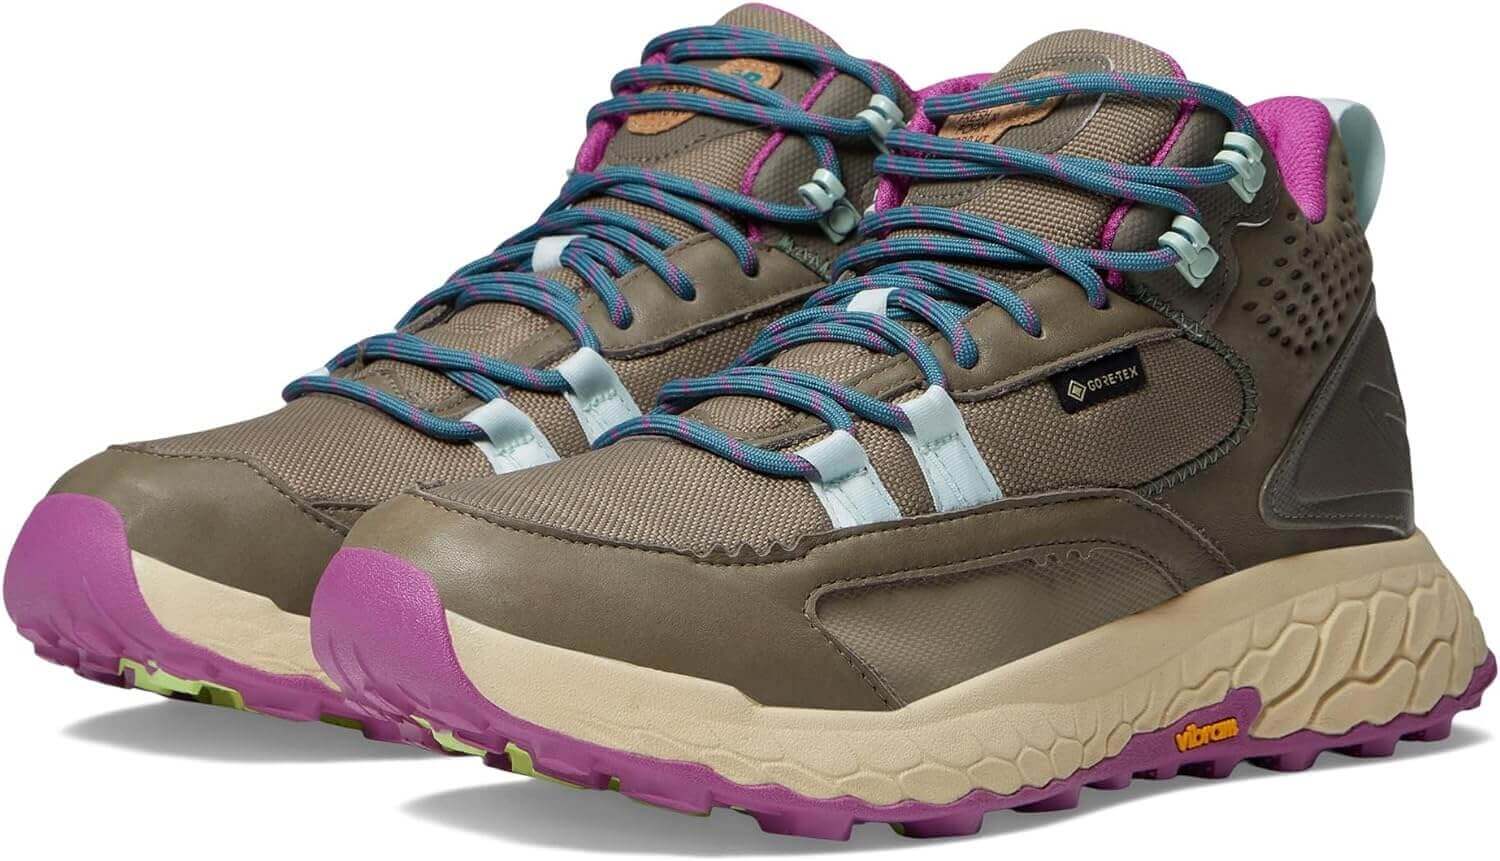 Shop The Latest >Women's Fresh Foam X Hierro V1 Mid-Cut Trail Running Shoe > *Only $161.93*> From The Top Brand > *New Balancel* > Shop Now and Get Free Shipping On Orders Over $45.00 >*Shop Earth Foot*